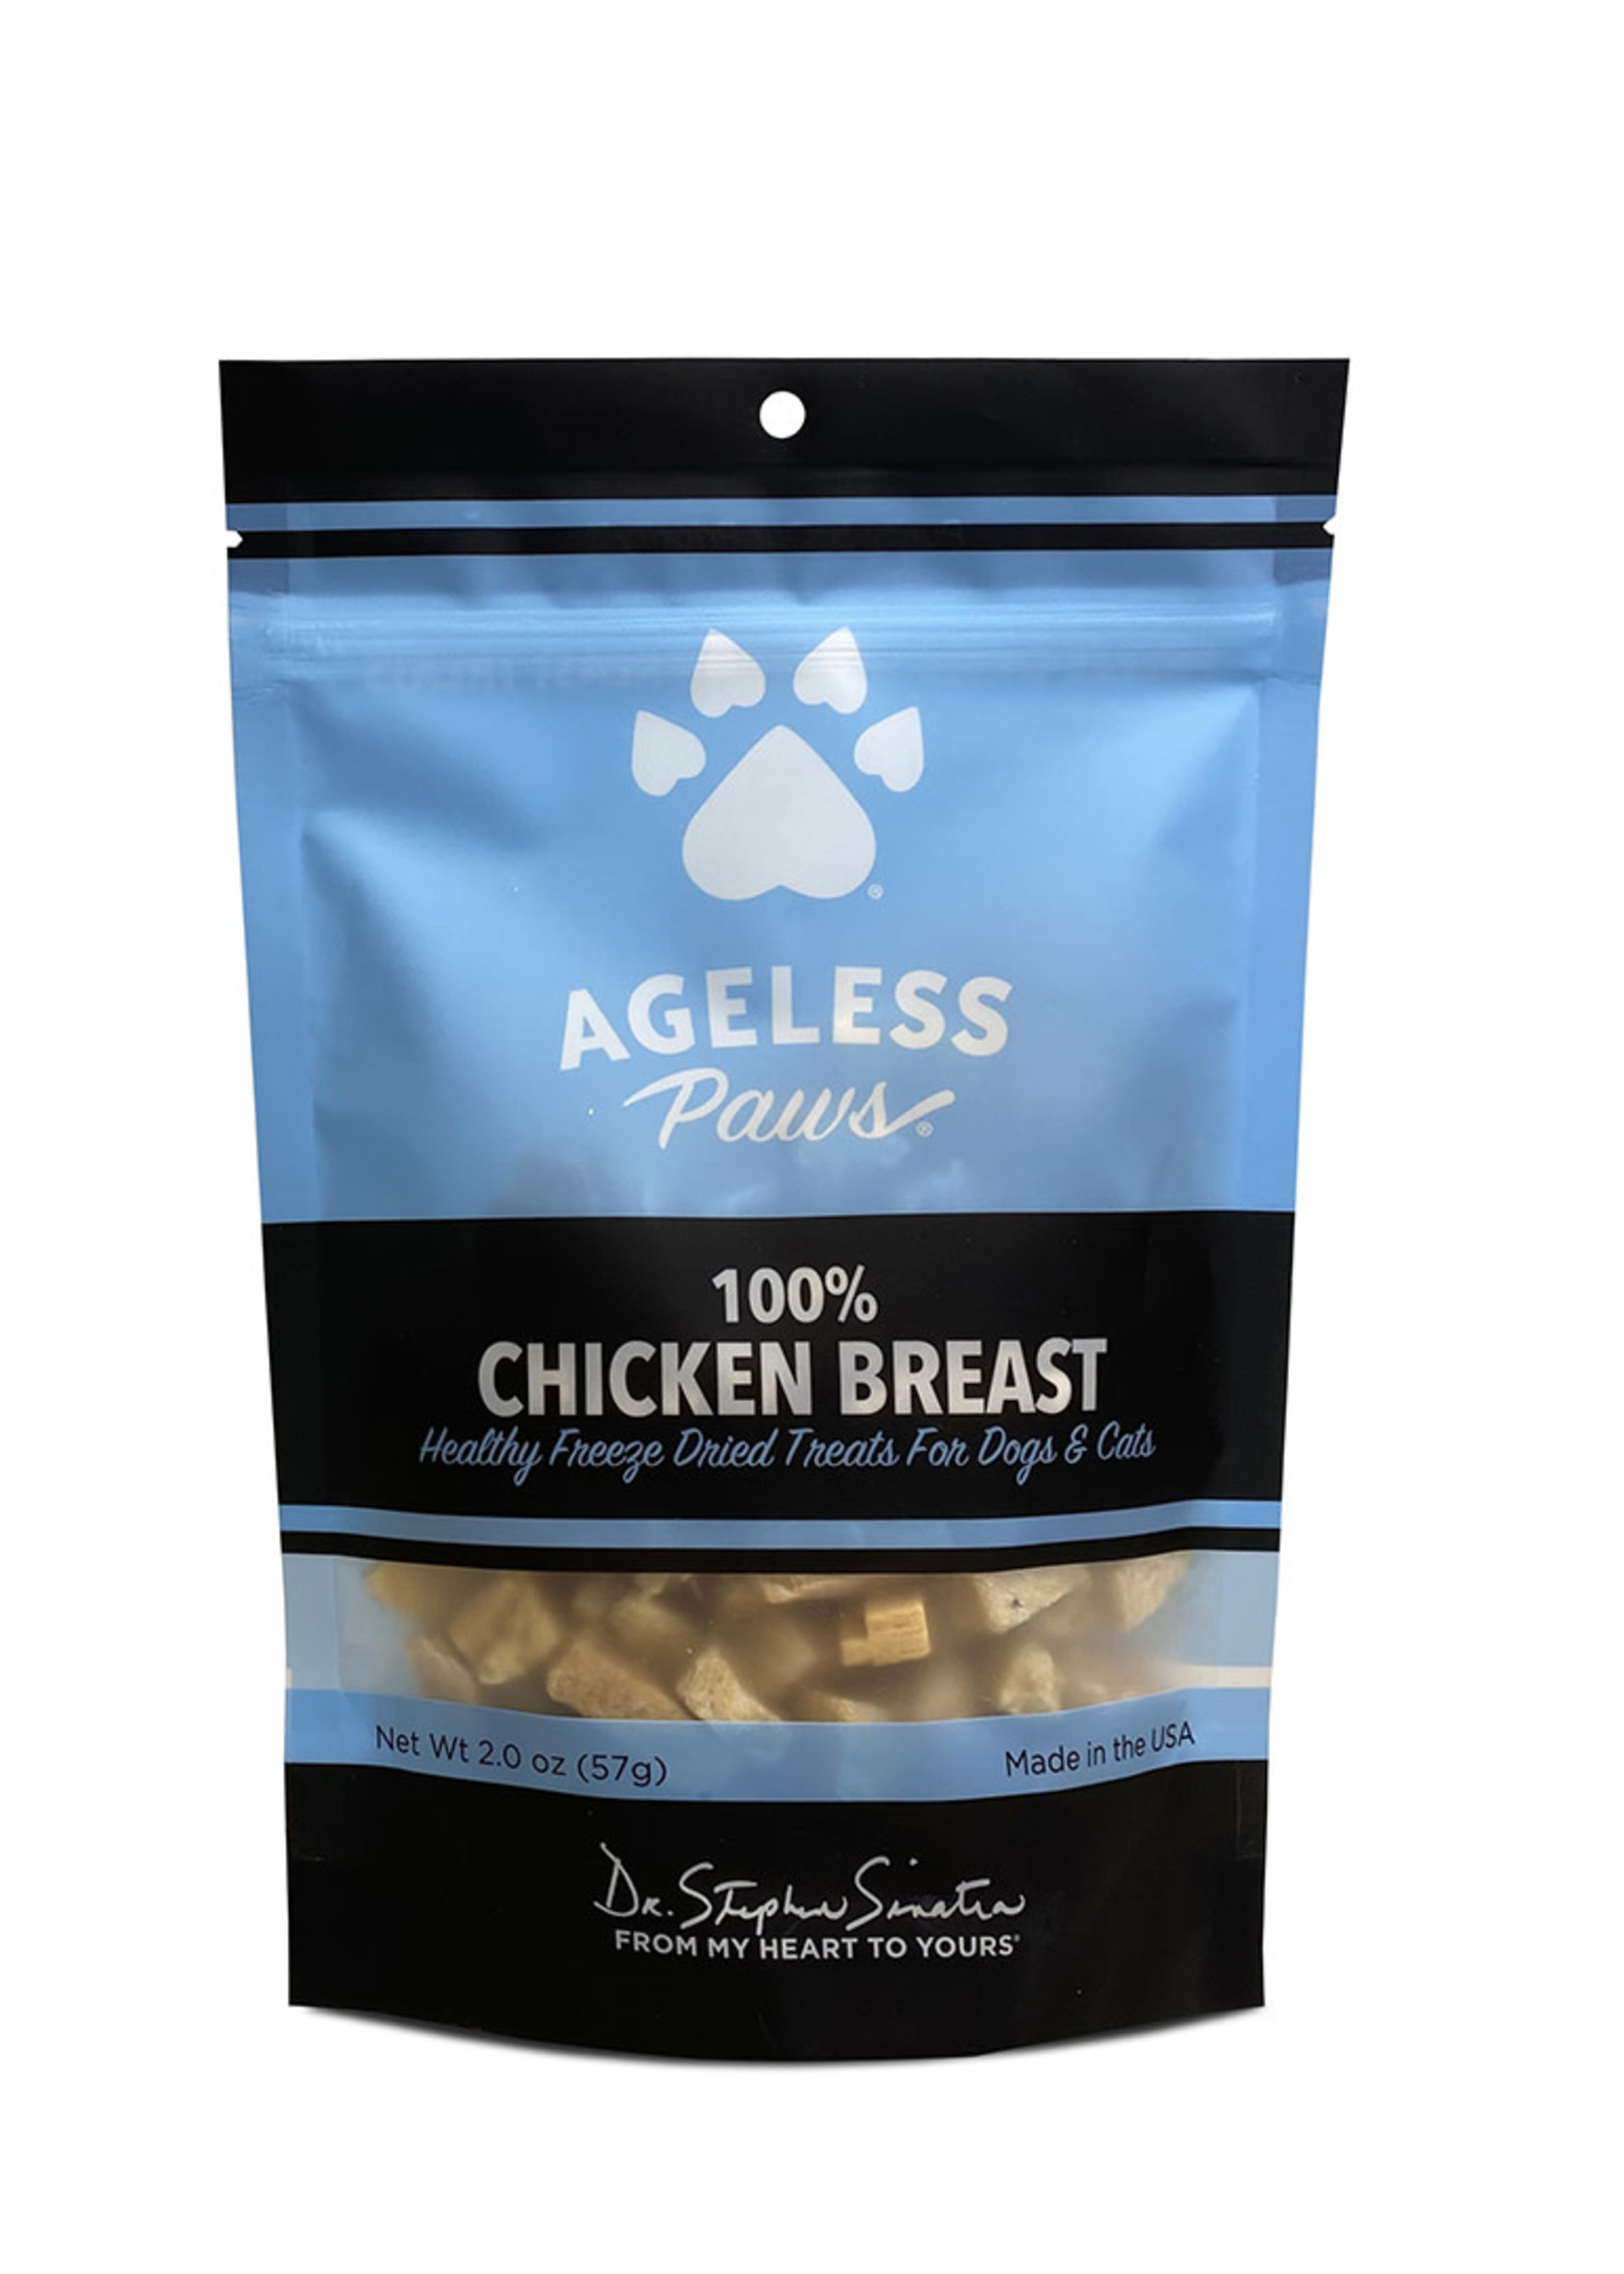 Ageless Paws 100% Chicken Breast Treats for Dogs and Cats